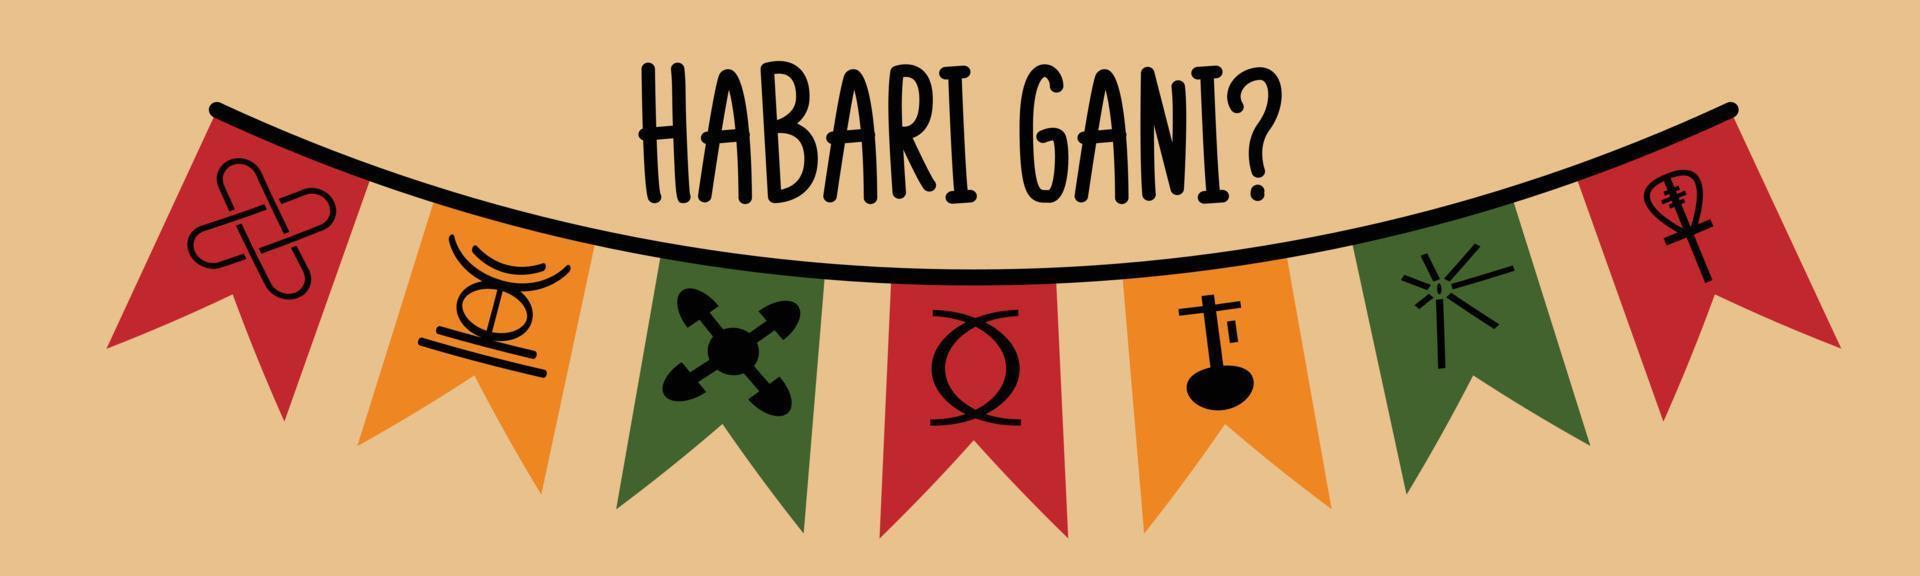 Habari Gani -  Swahili Translation - What is the news. Traditional greeting phrase for Kwanzaa festival celebration. Festive bunting flags with seven principles of Kwanzaa symbols. vector